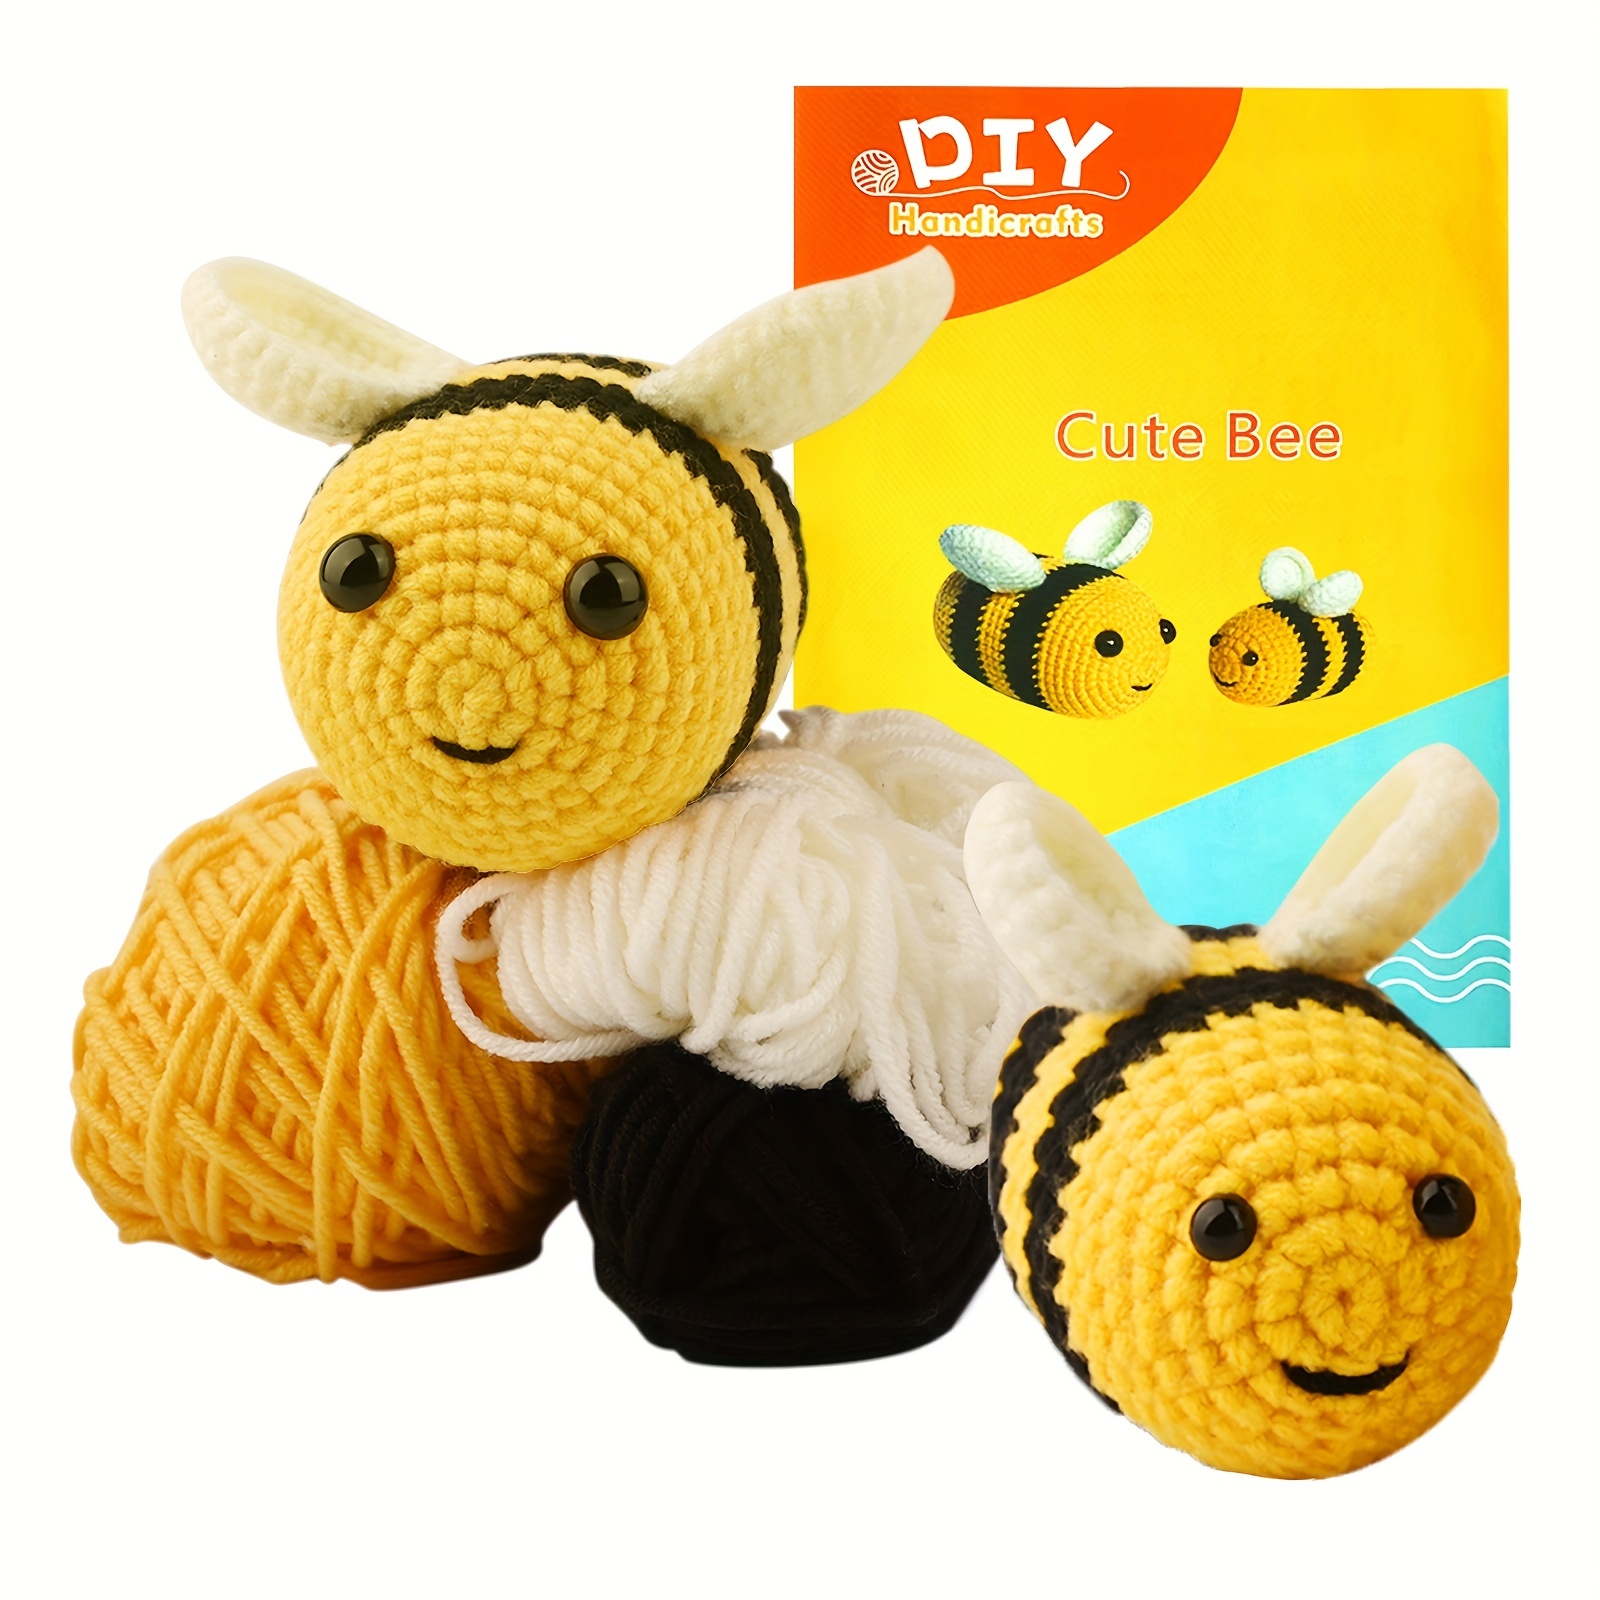 Maziky Beginners Crochet Kit for Adults Cute Bee Crochet Starter Kit with Step-by-Step Video Tutorials Learn to Crochet (1PBees, Gold)